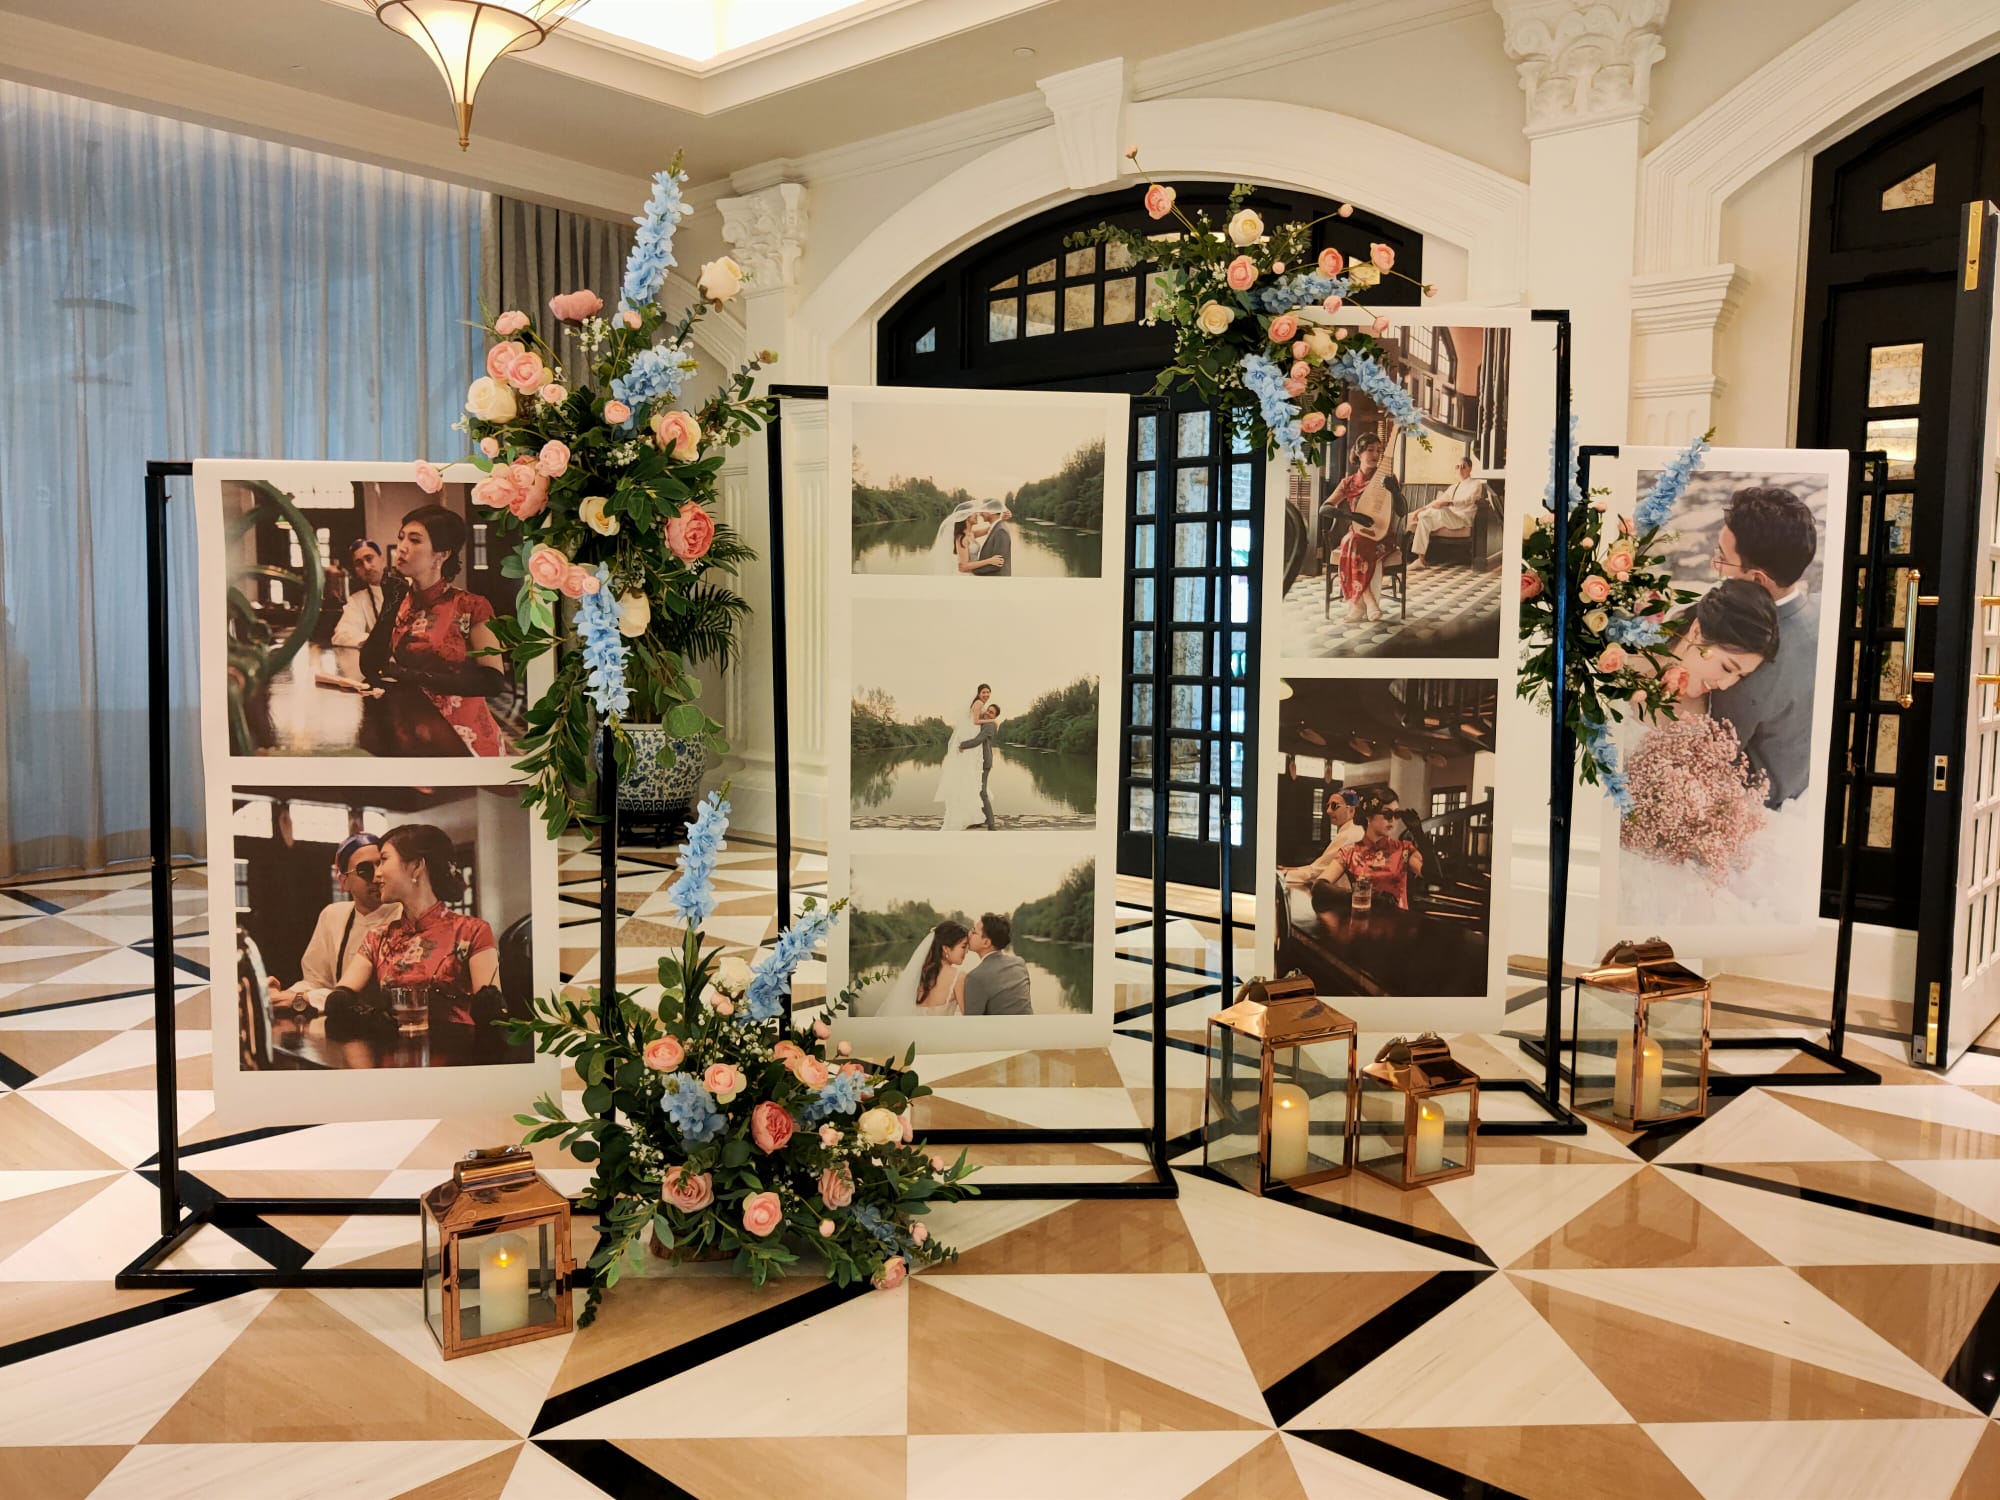 Wedding planners in Singapore